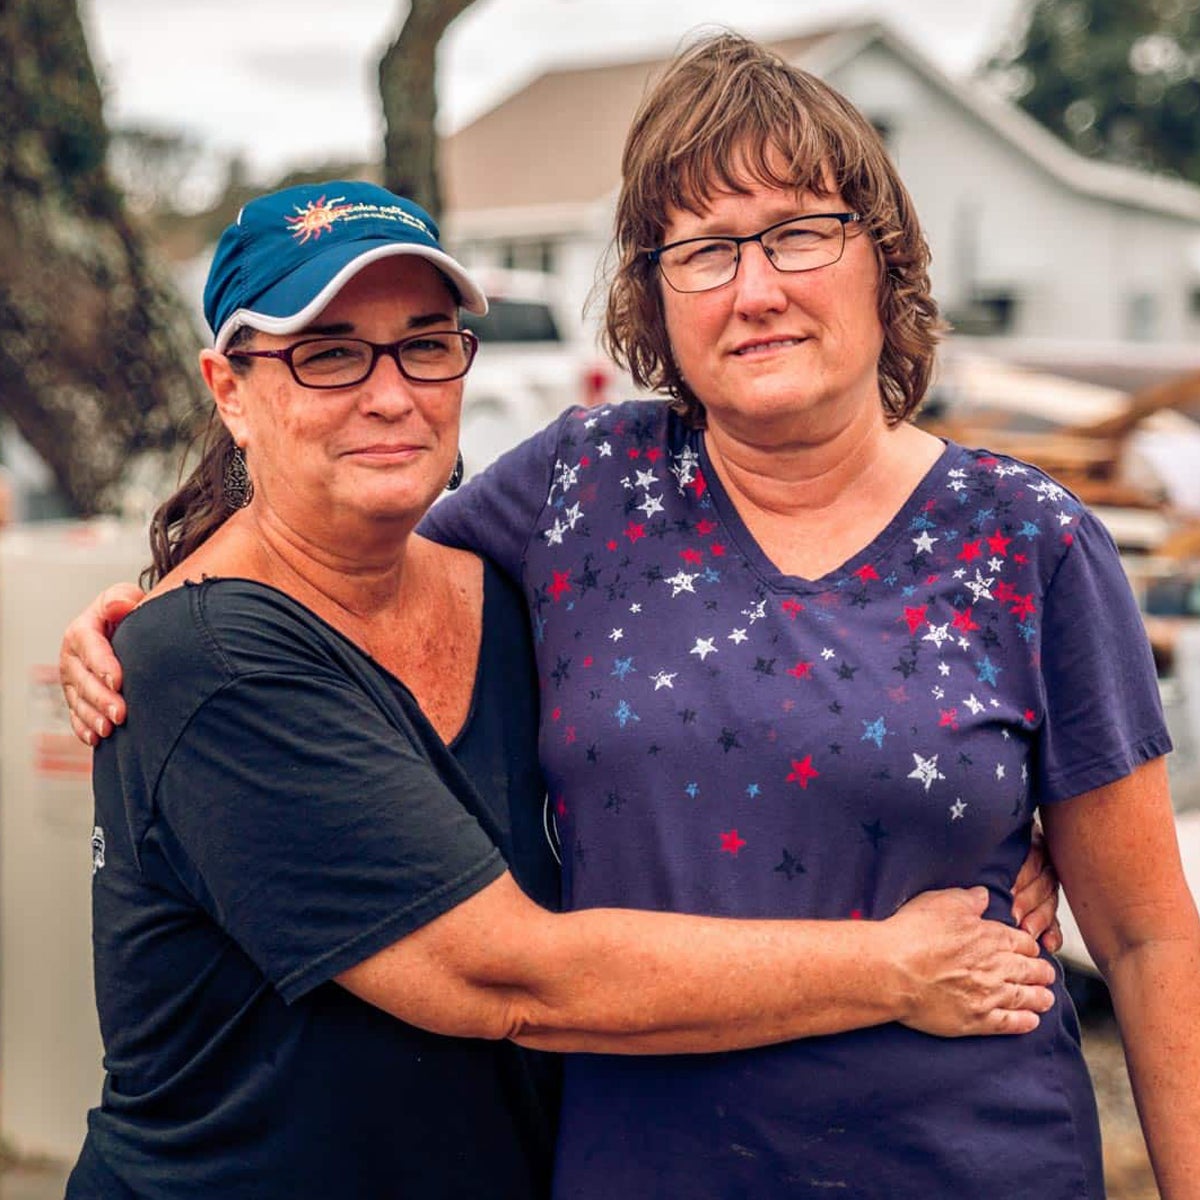 Operation Blessing is serving Hurricane Dorian victims like Trudy and her sister.